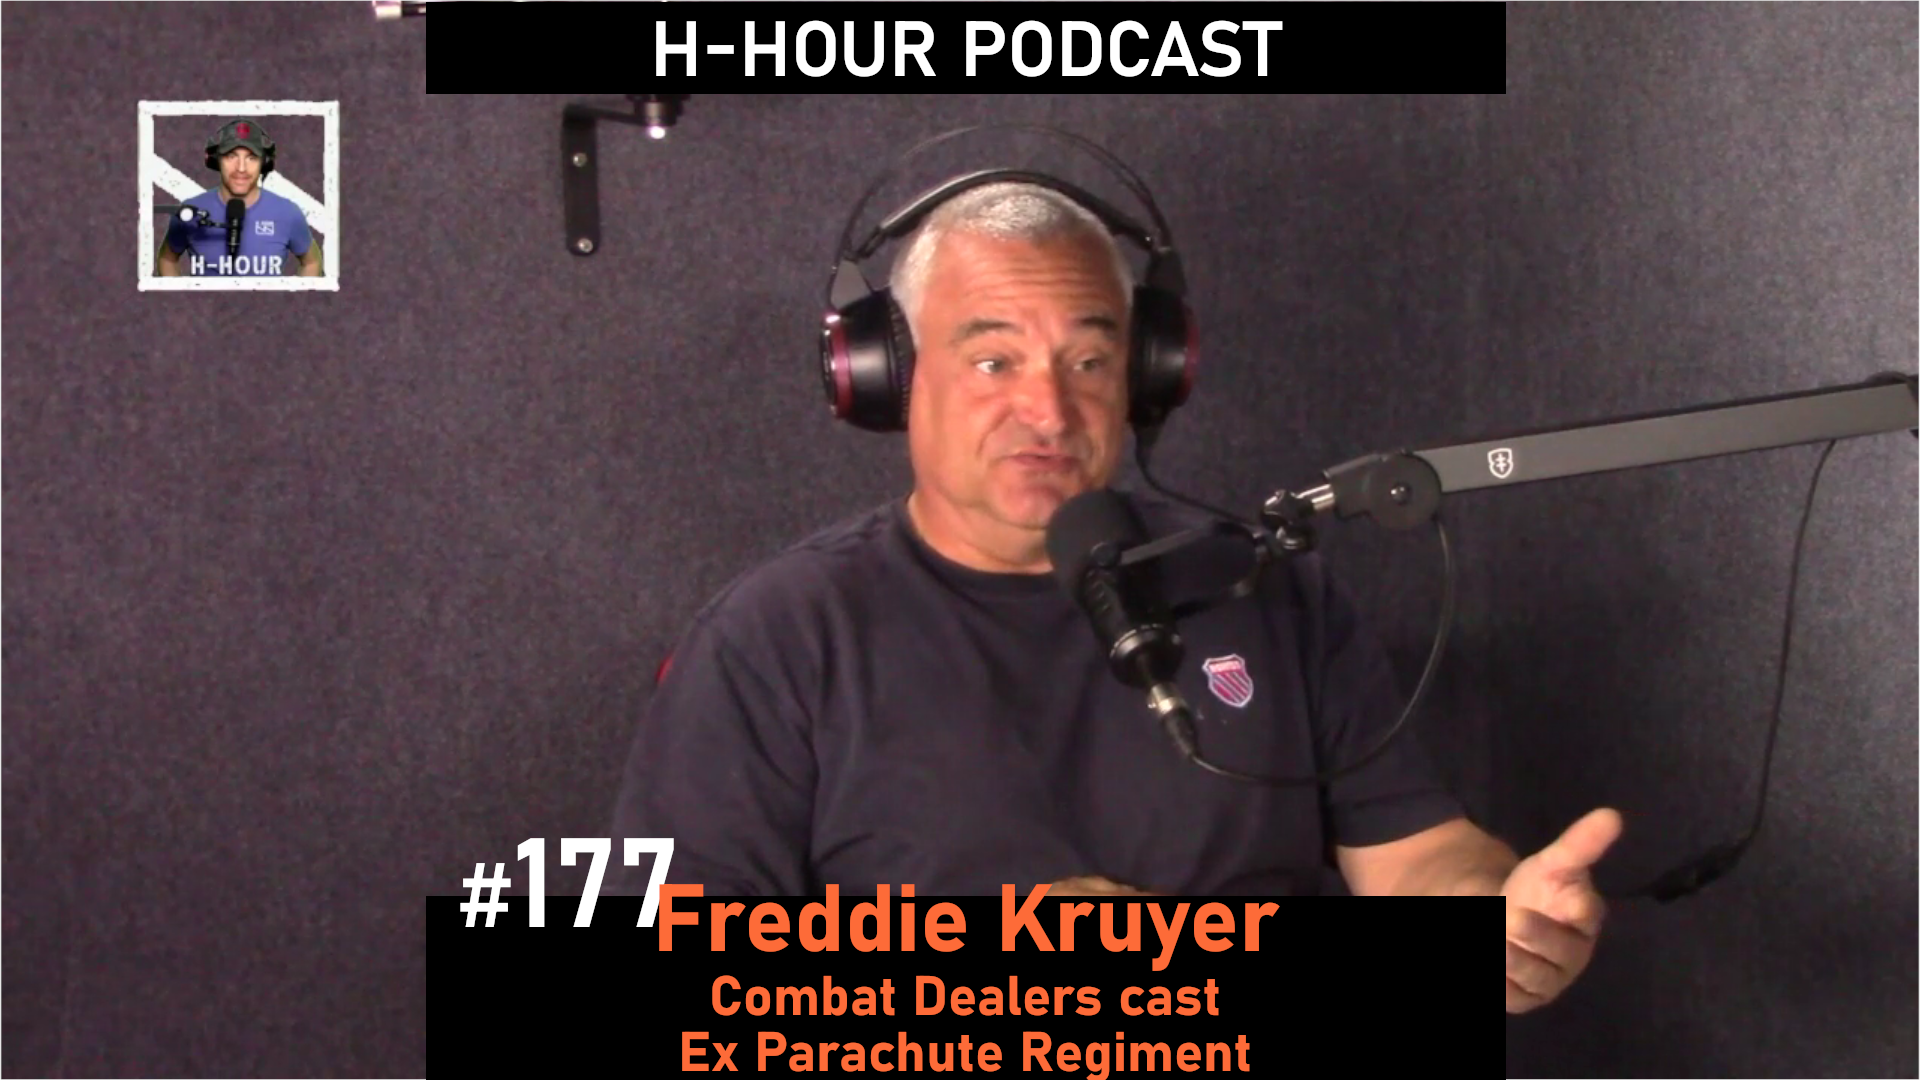 freddie kruyer h-hour 177 Podcast cover image